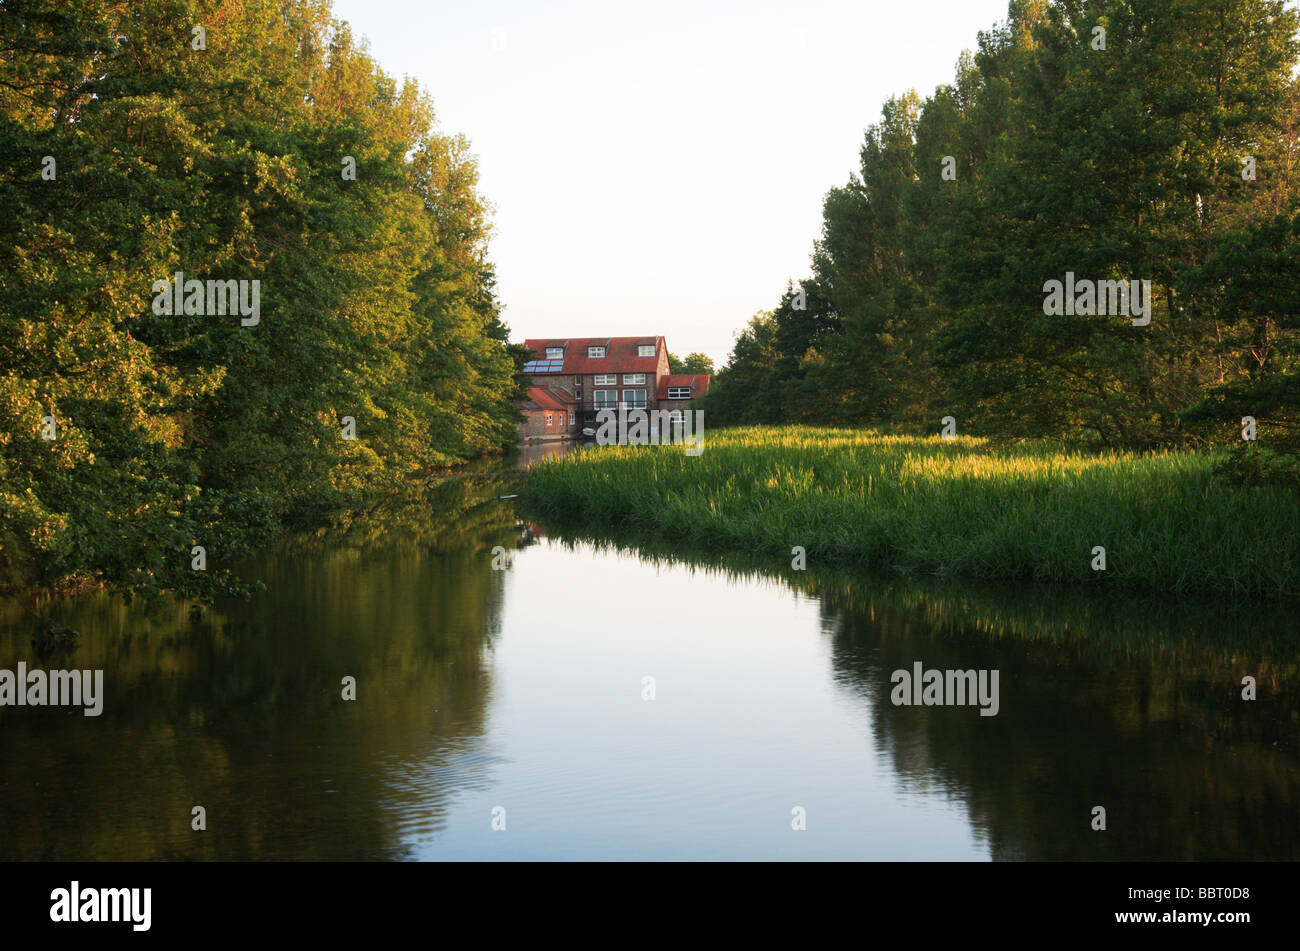 The River Glaven at Glandford, Norfolk, United Kingdom, in early morning. Stock Photo